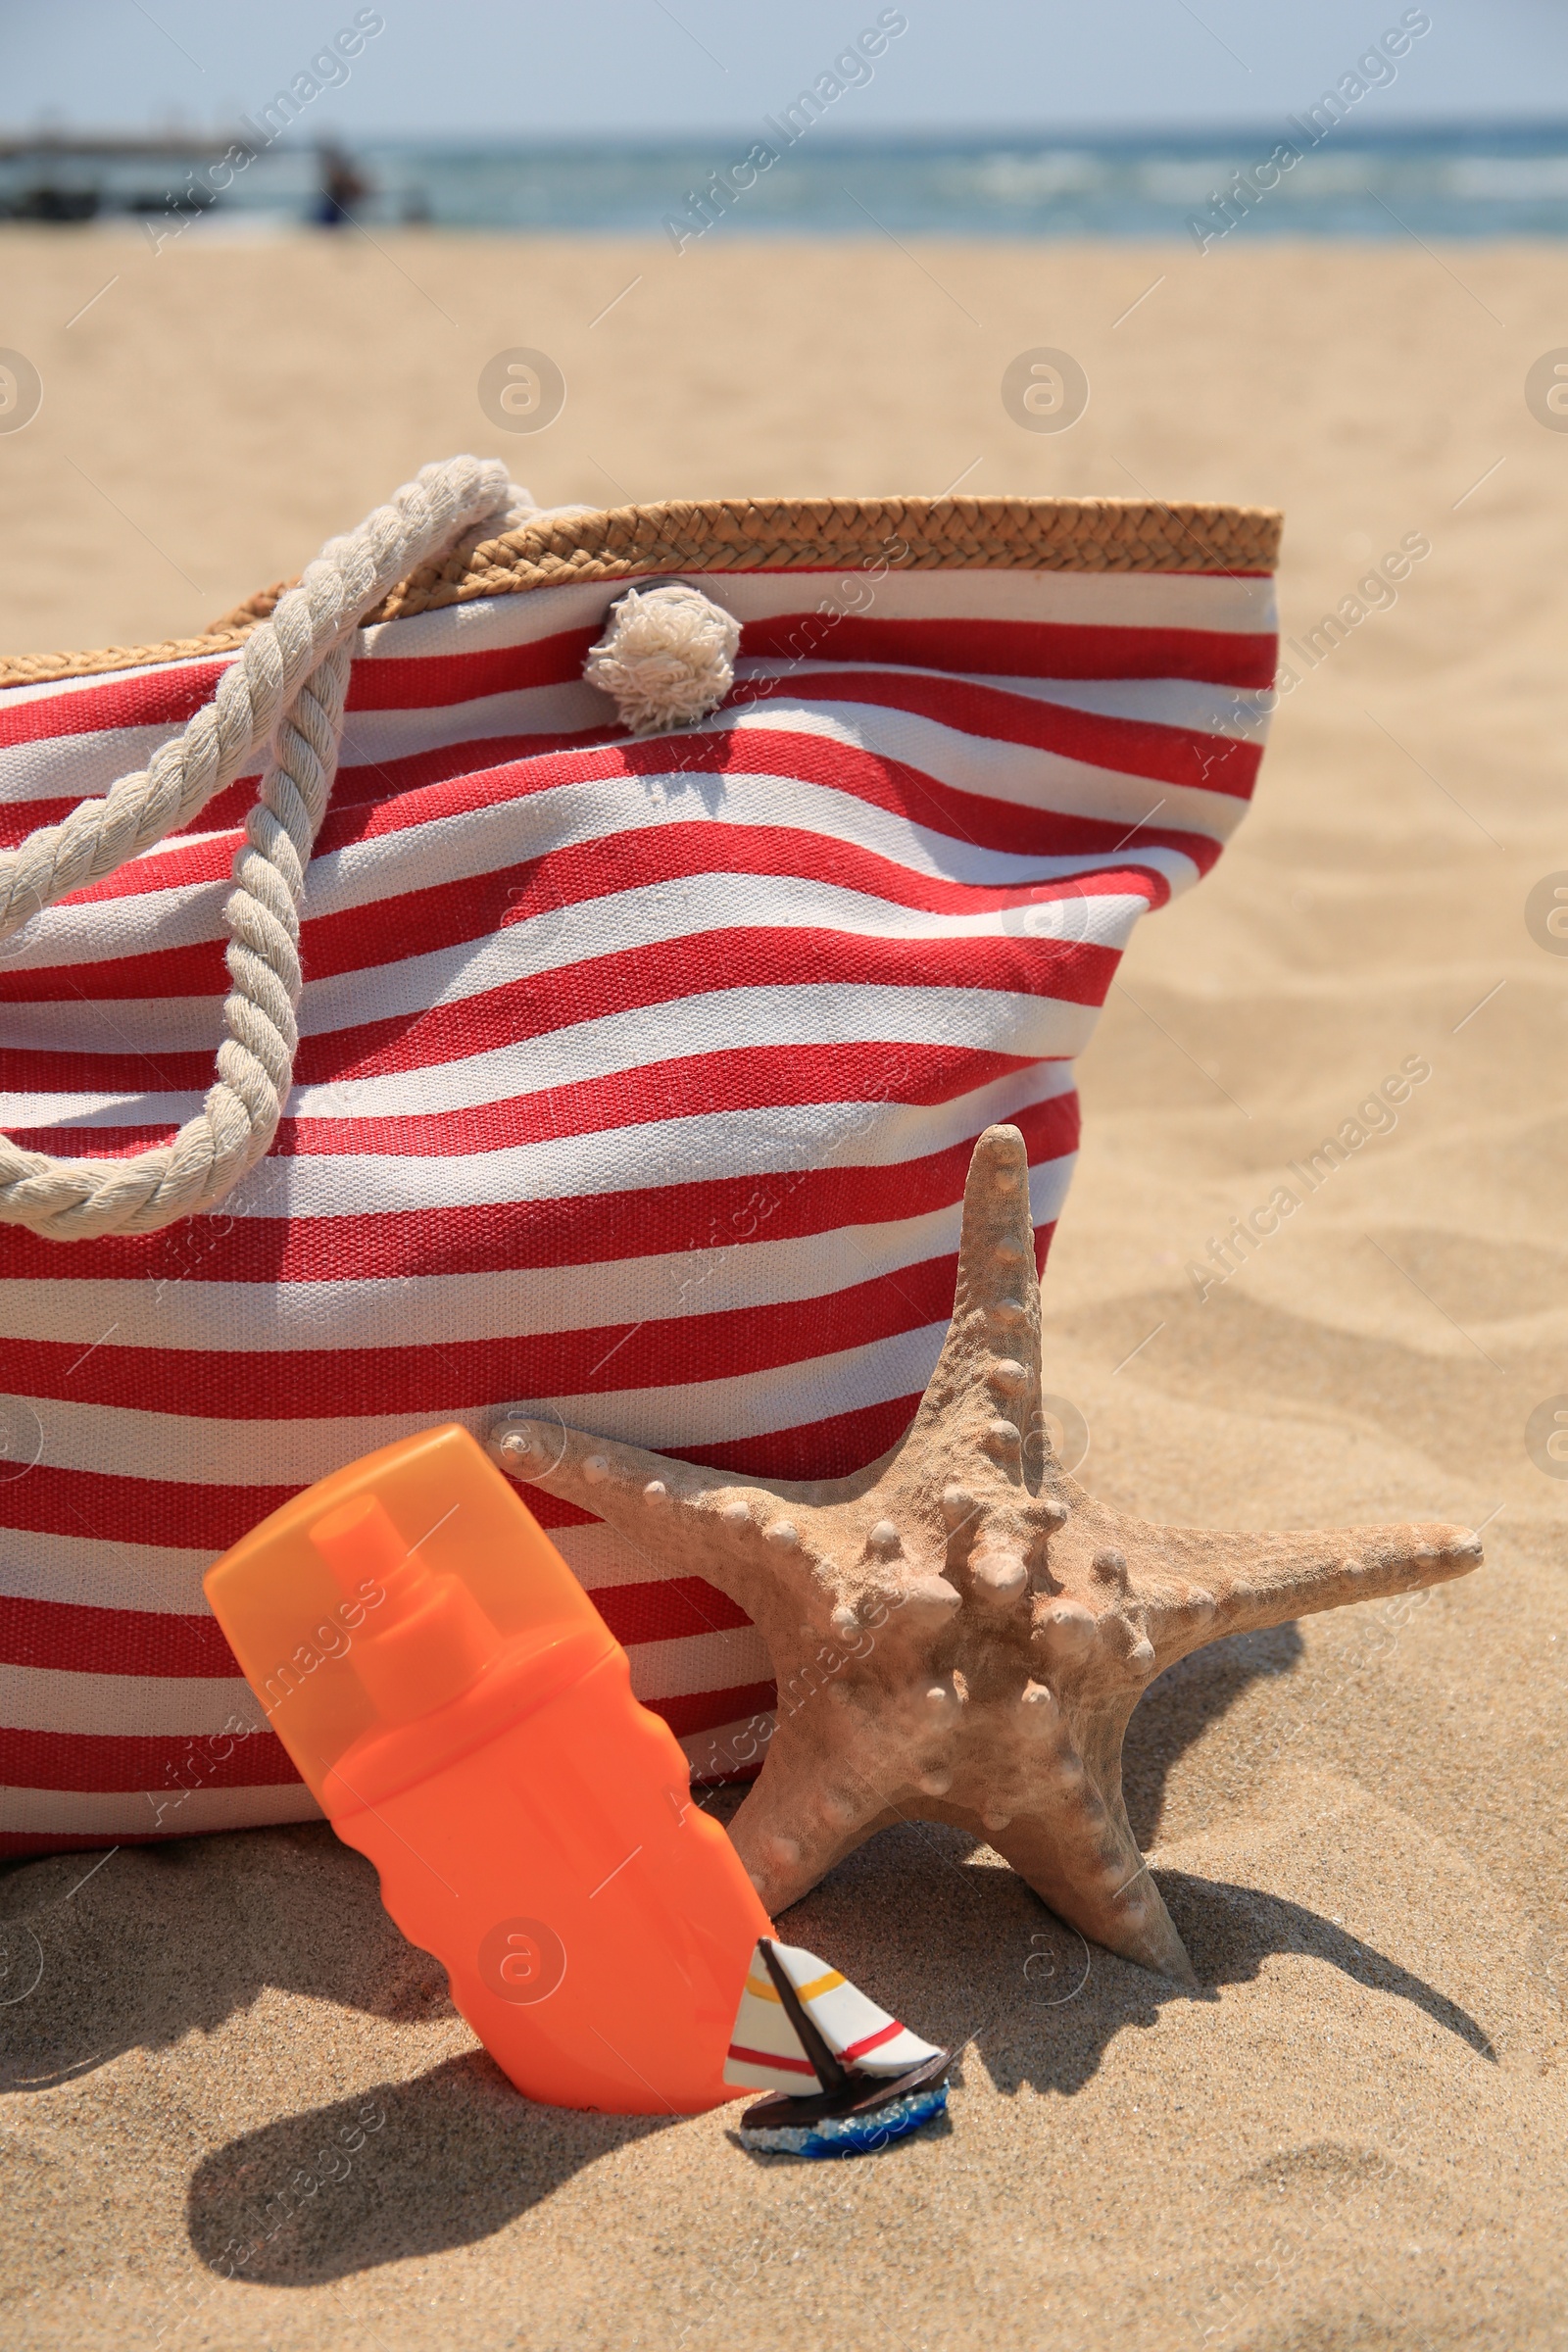 Photo of Bottle of sunscreen, starfish and bag on sand. Sun protection care